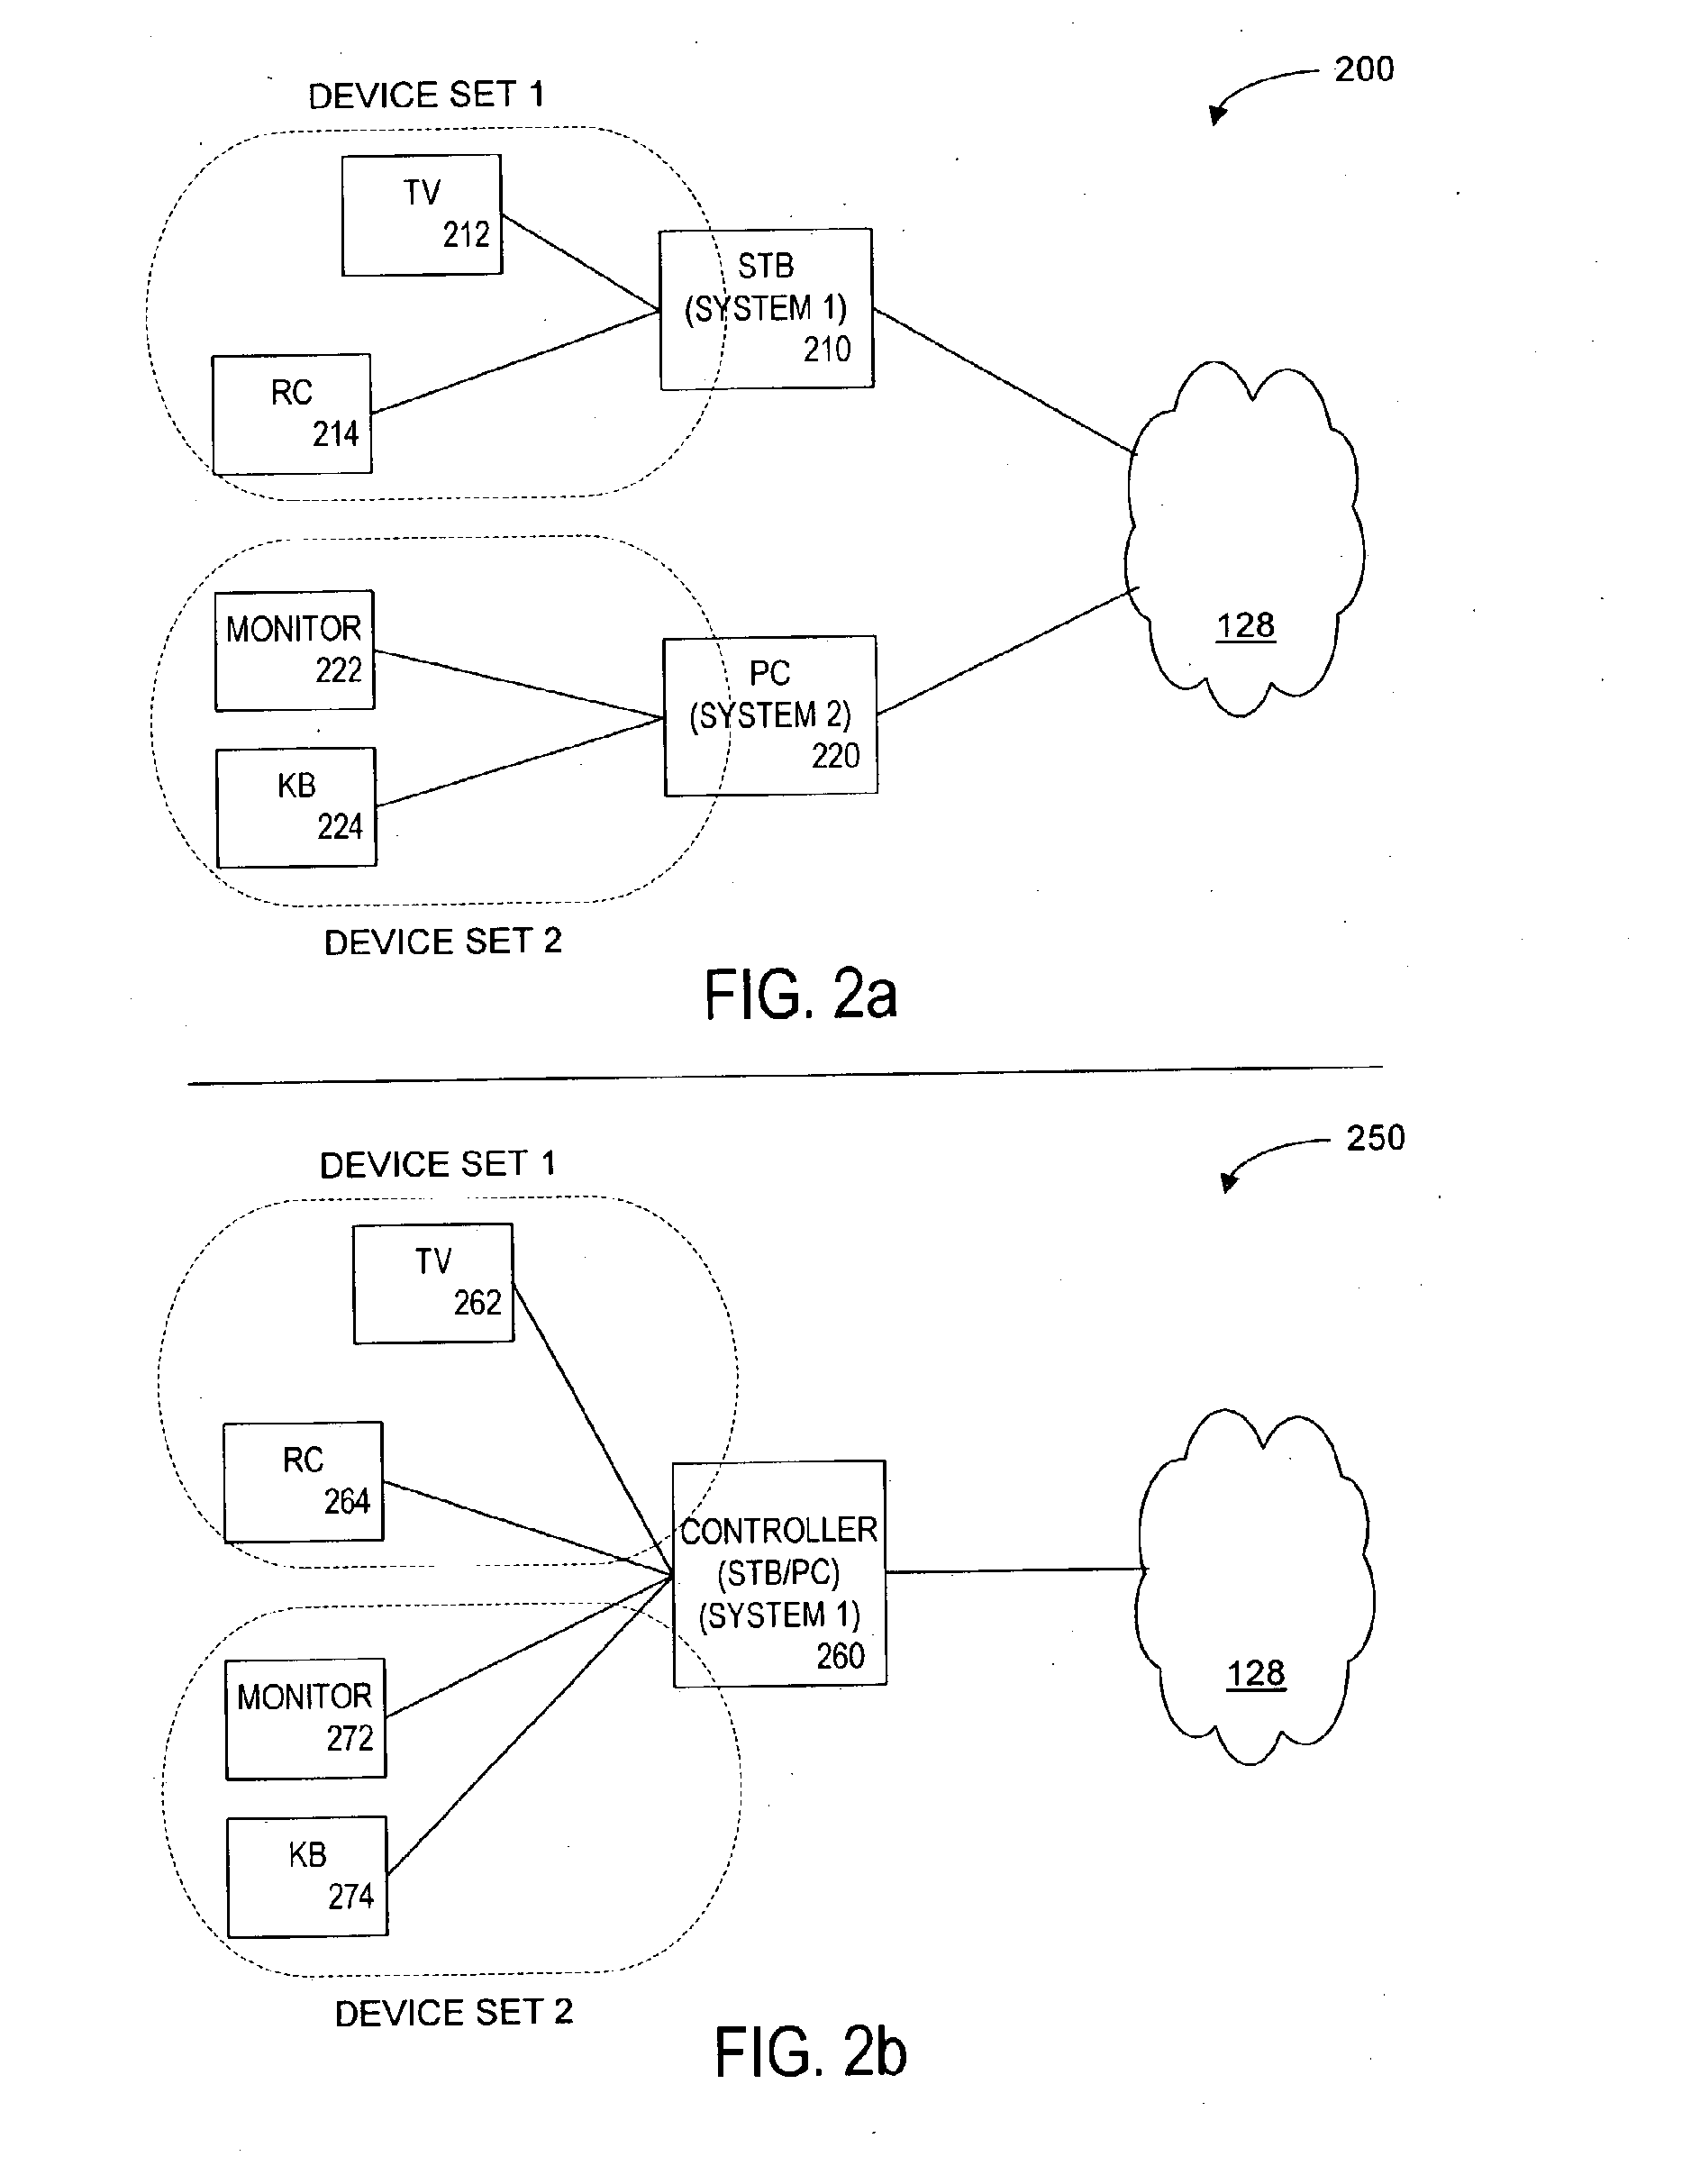 Method and apparatus for browsing using alternative linkbases